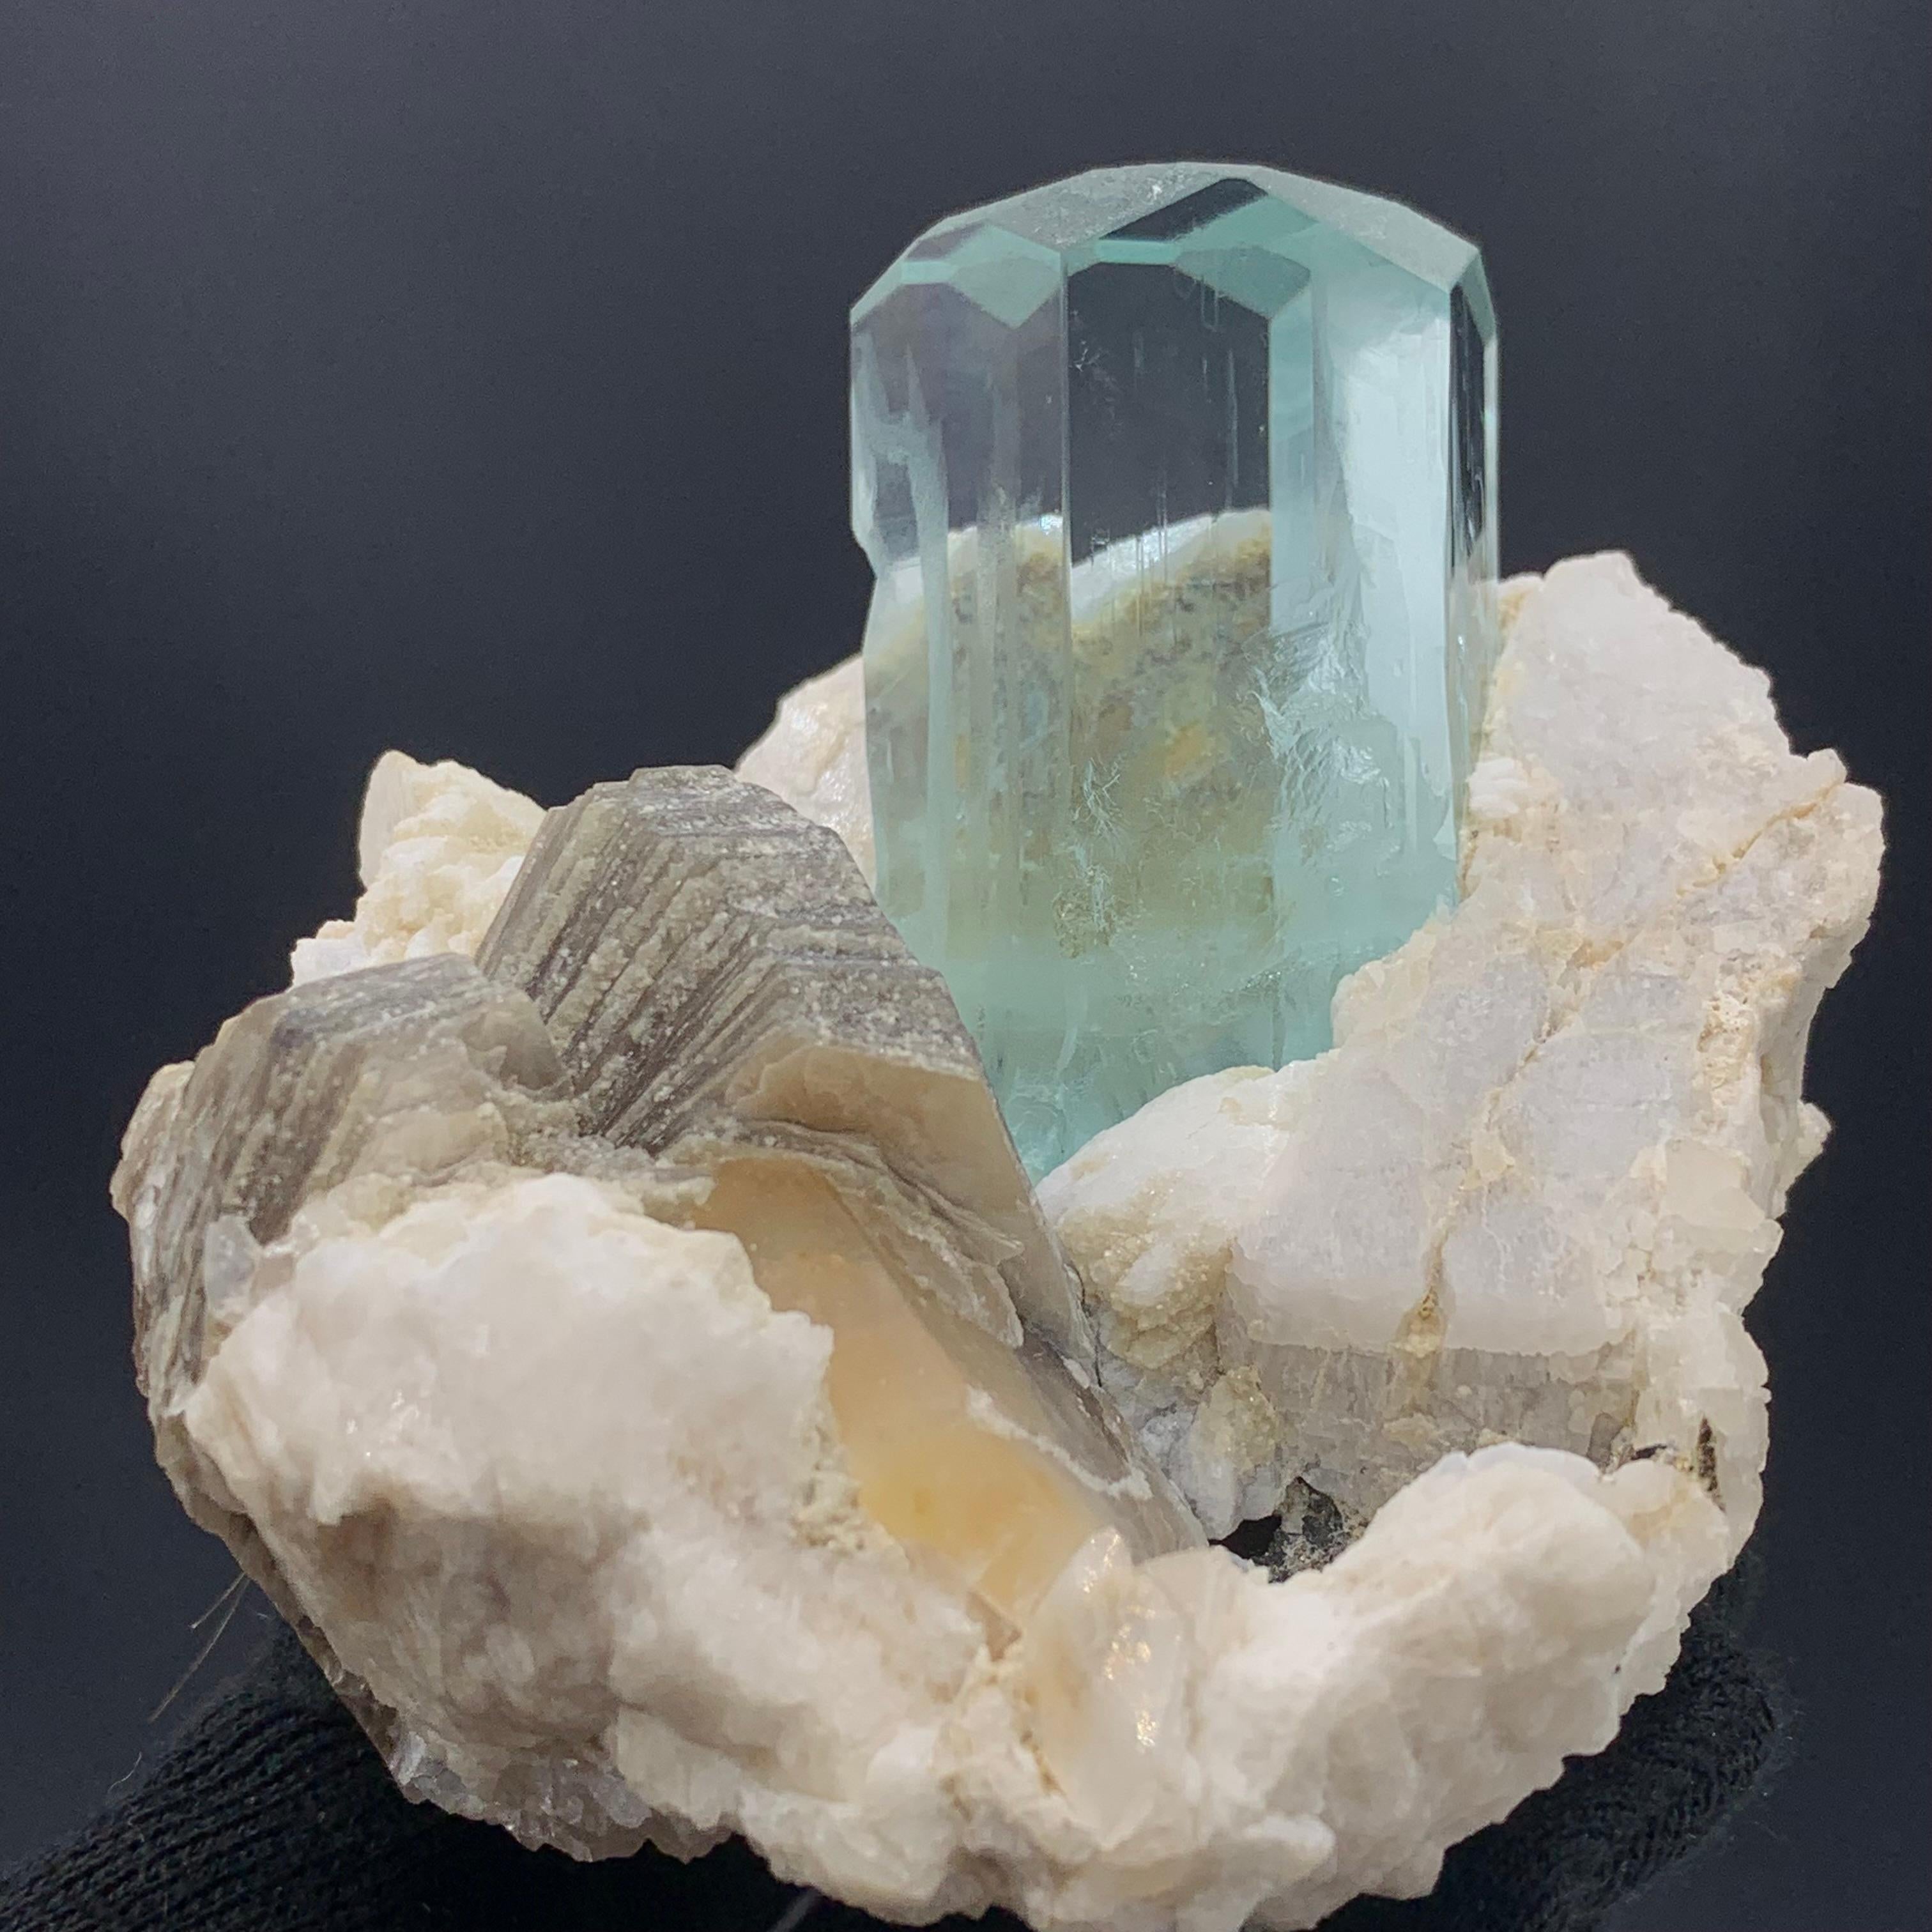 Exquisite Aquamarine Specimen With Mica And Feldspar From Pakistan 
Weight: 441 Gram 
Dimension: 8 x 8.5 x 7.5 Cm
Origin: Skardu Valley, Pakistan 

Aquamarine helps us to gain insight, truth, and wisdom. It can be used to help calm the mind, nerves,